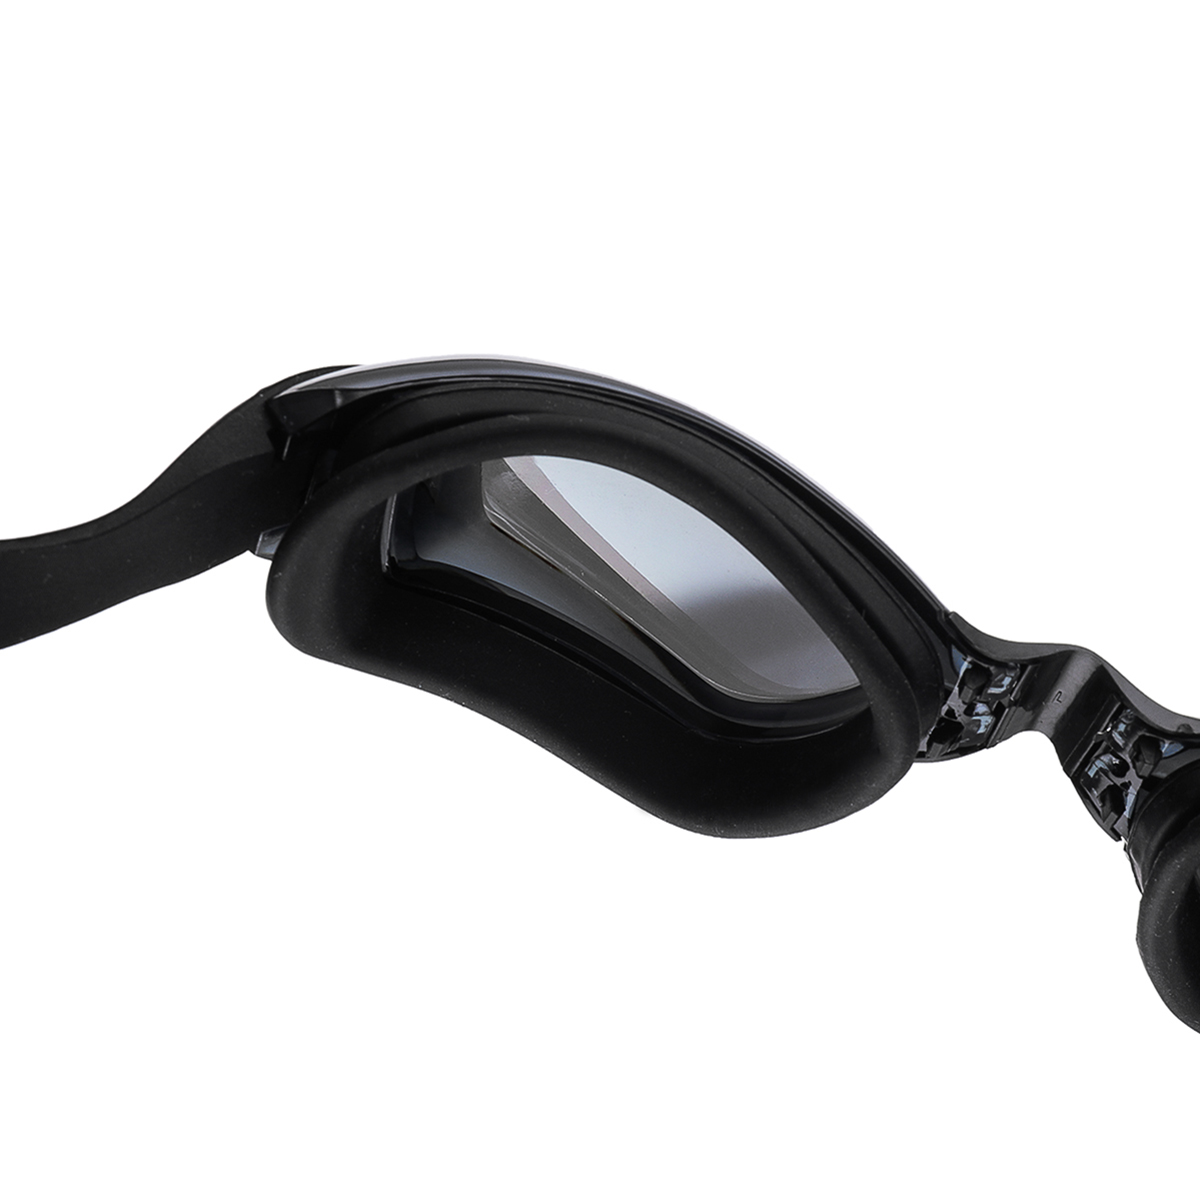 2Pair-Swimming-Goggles-with-Earplug-Nose-Rest-Transparent-Anti-UV-Anti-Fog-Protection-Goggles-for-Ad-1884483-13